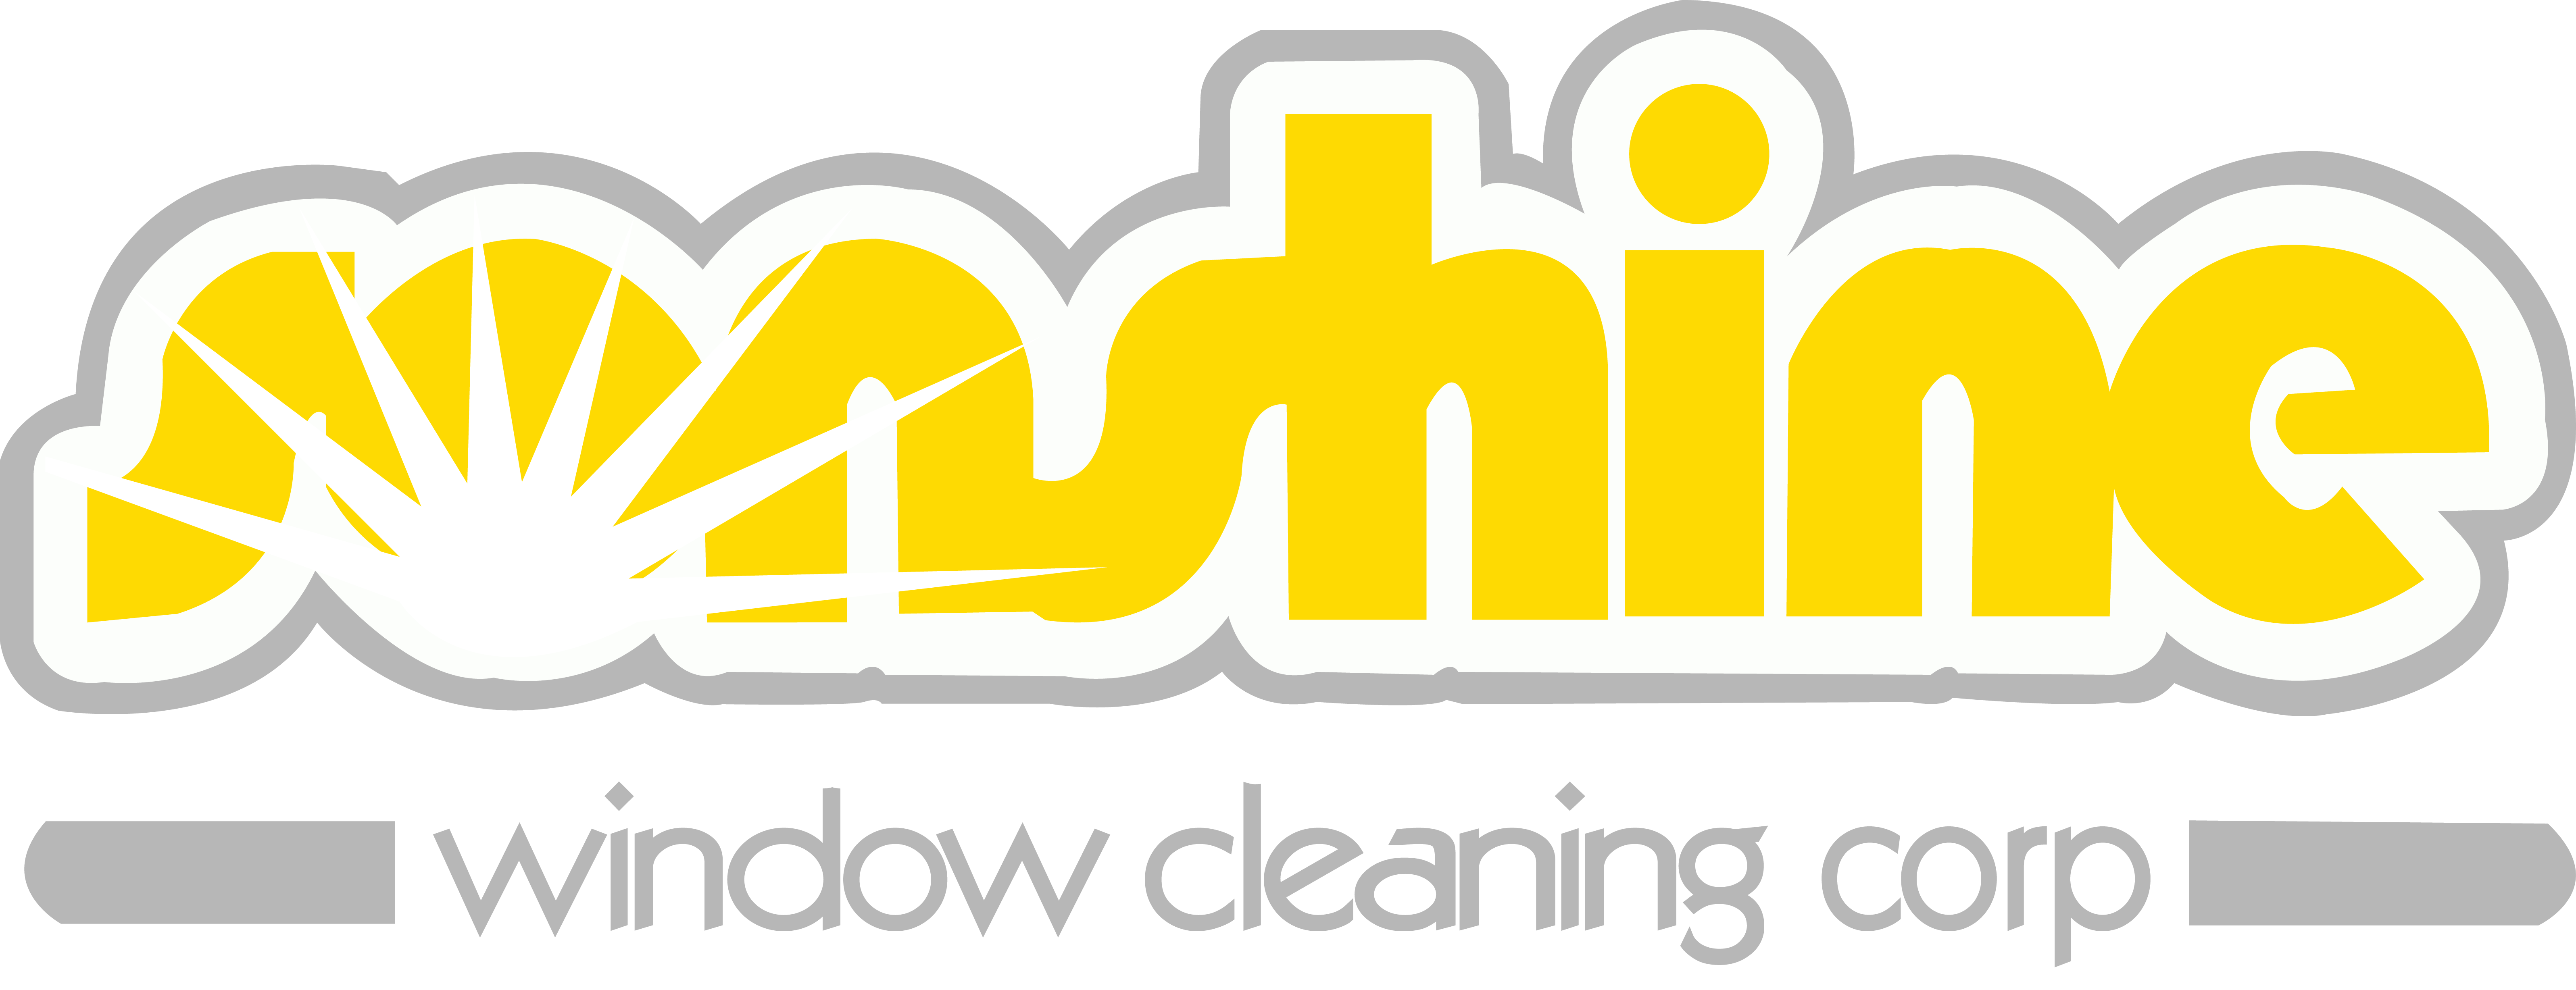 Sonshine Window Cleaning